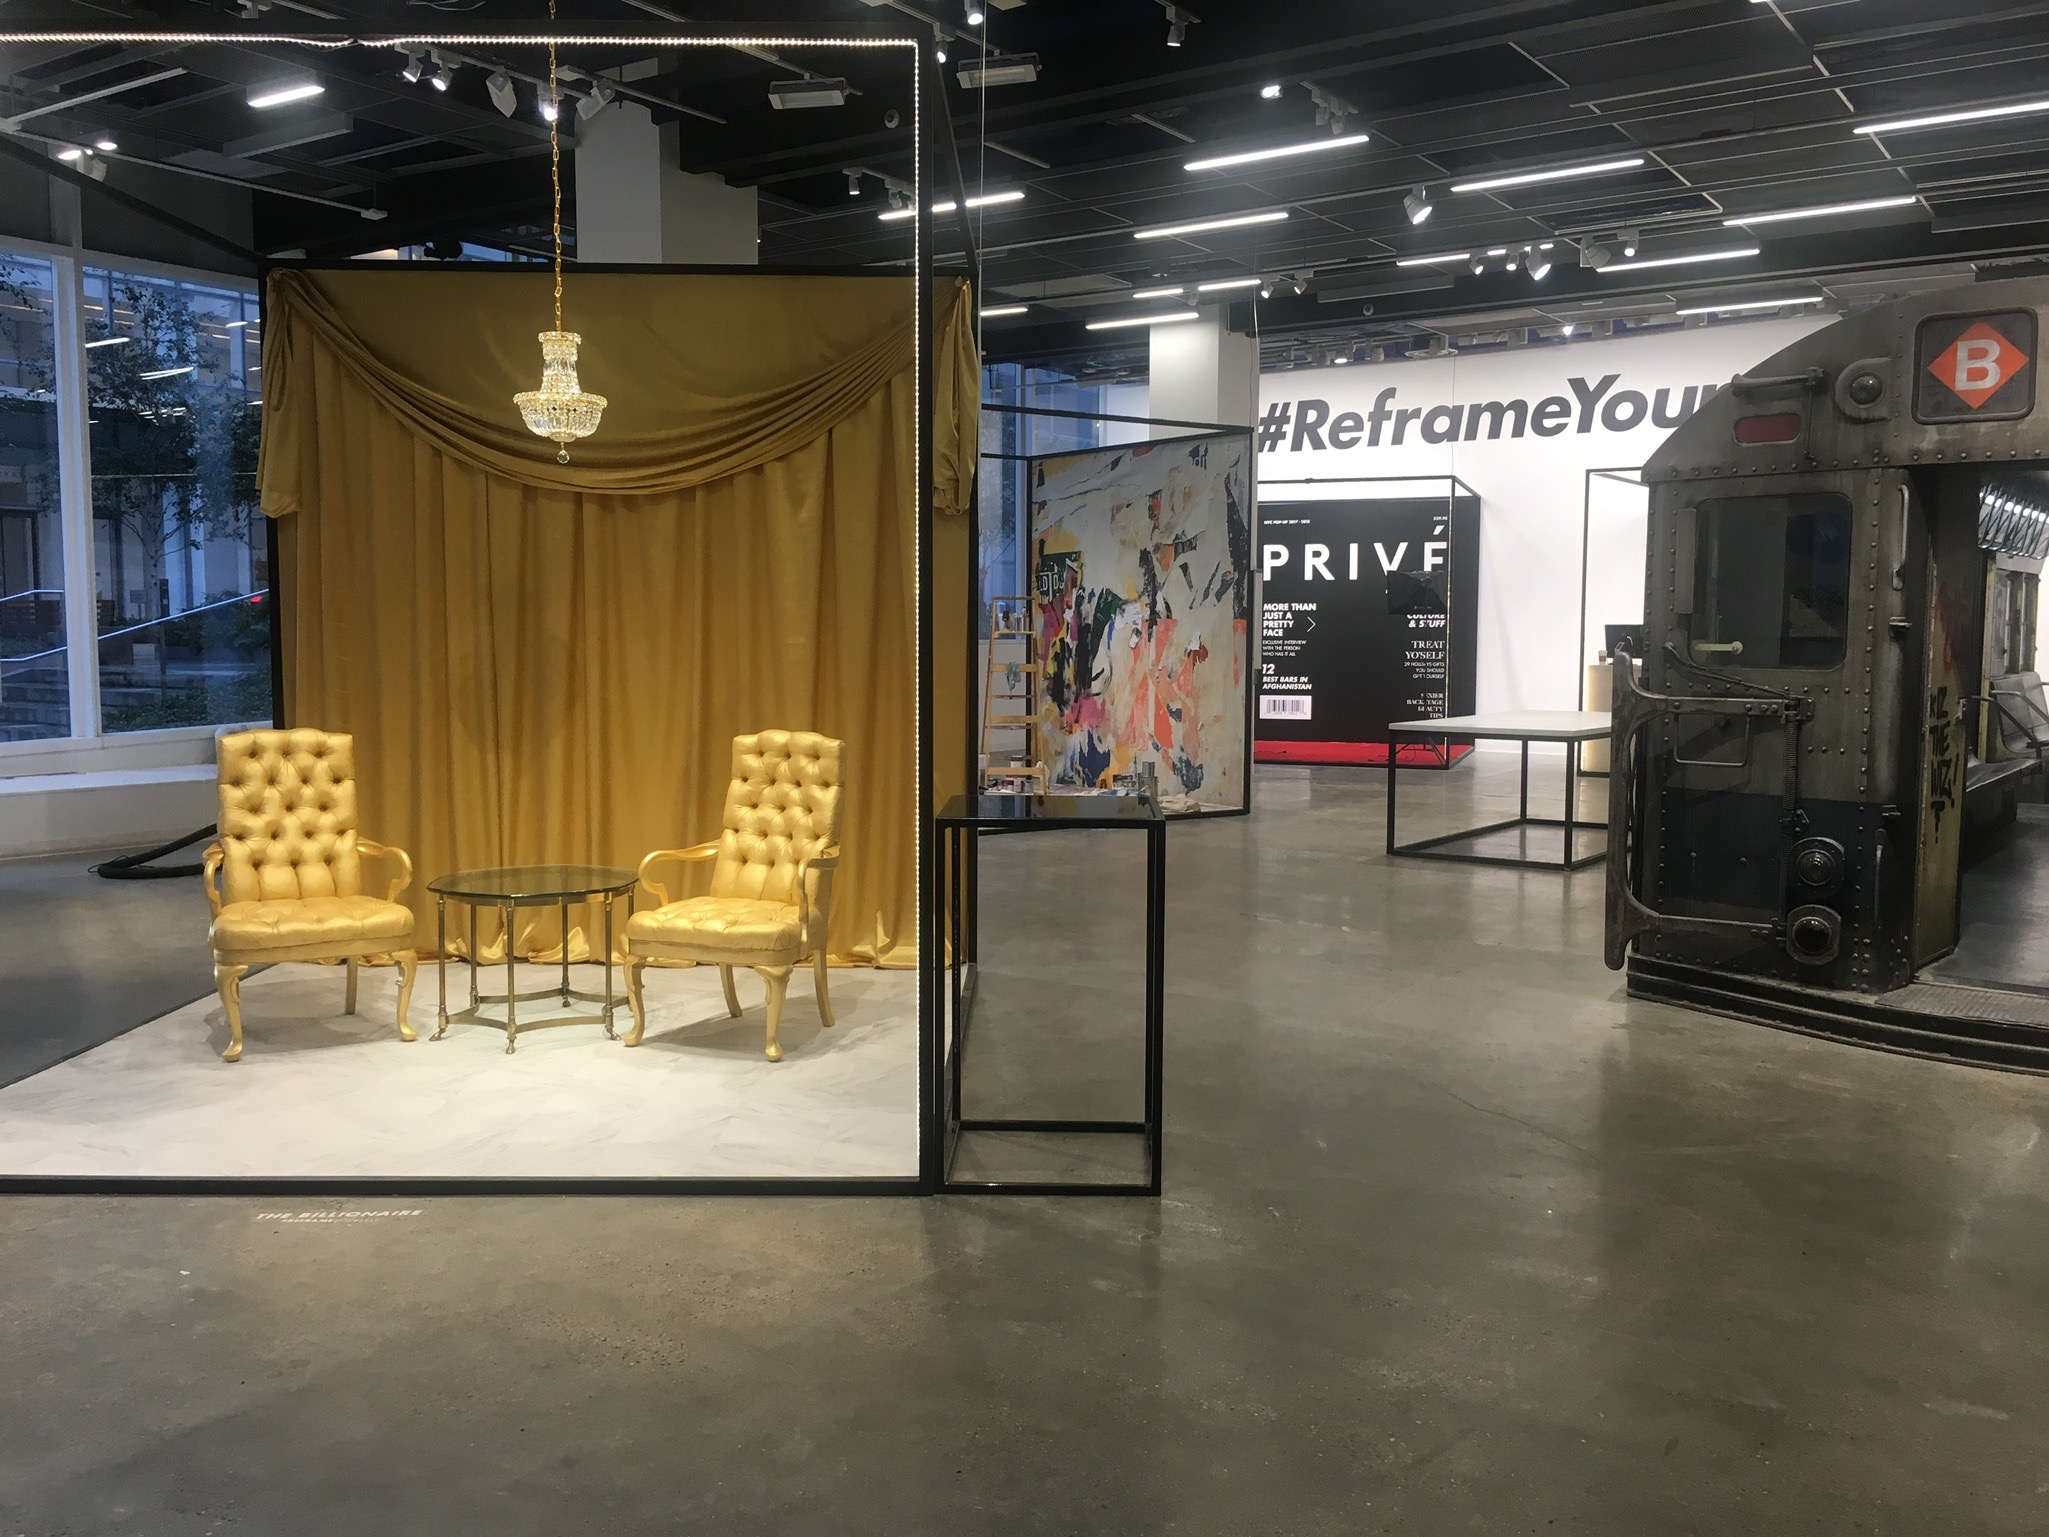 Preview Events - Prive Revaux - framed display.jpg